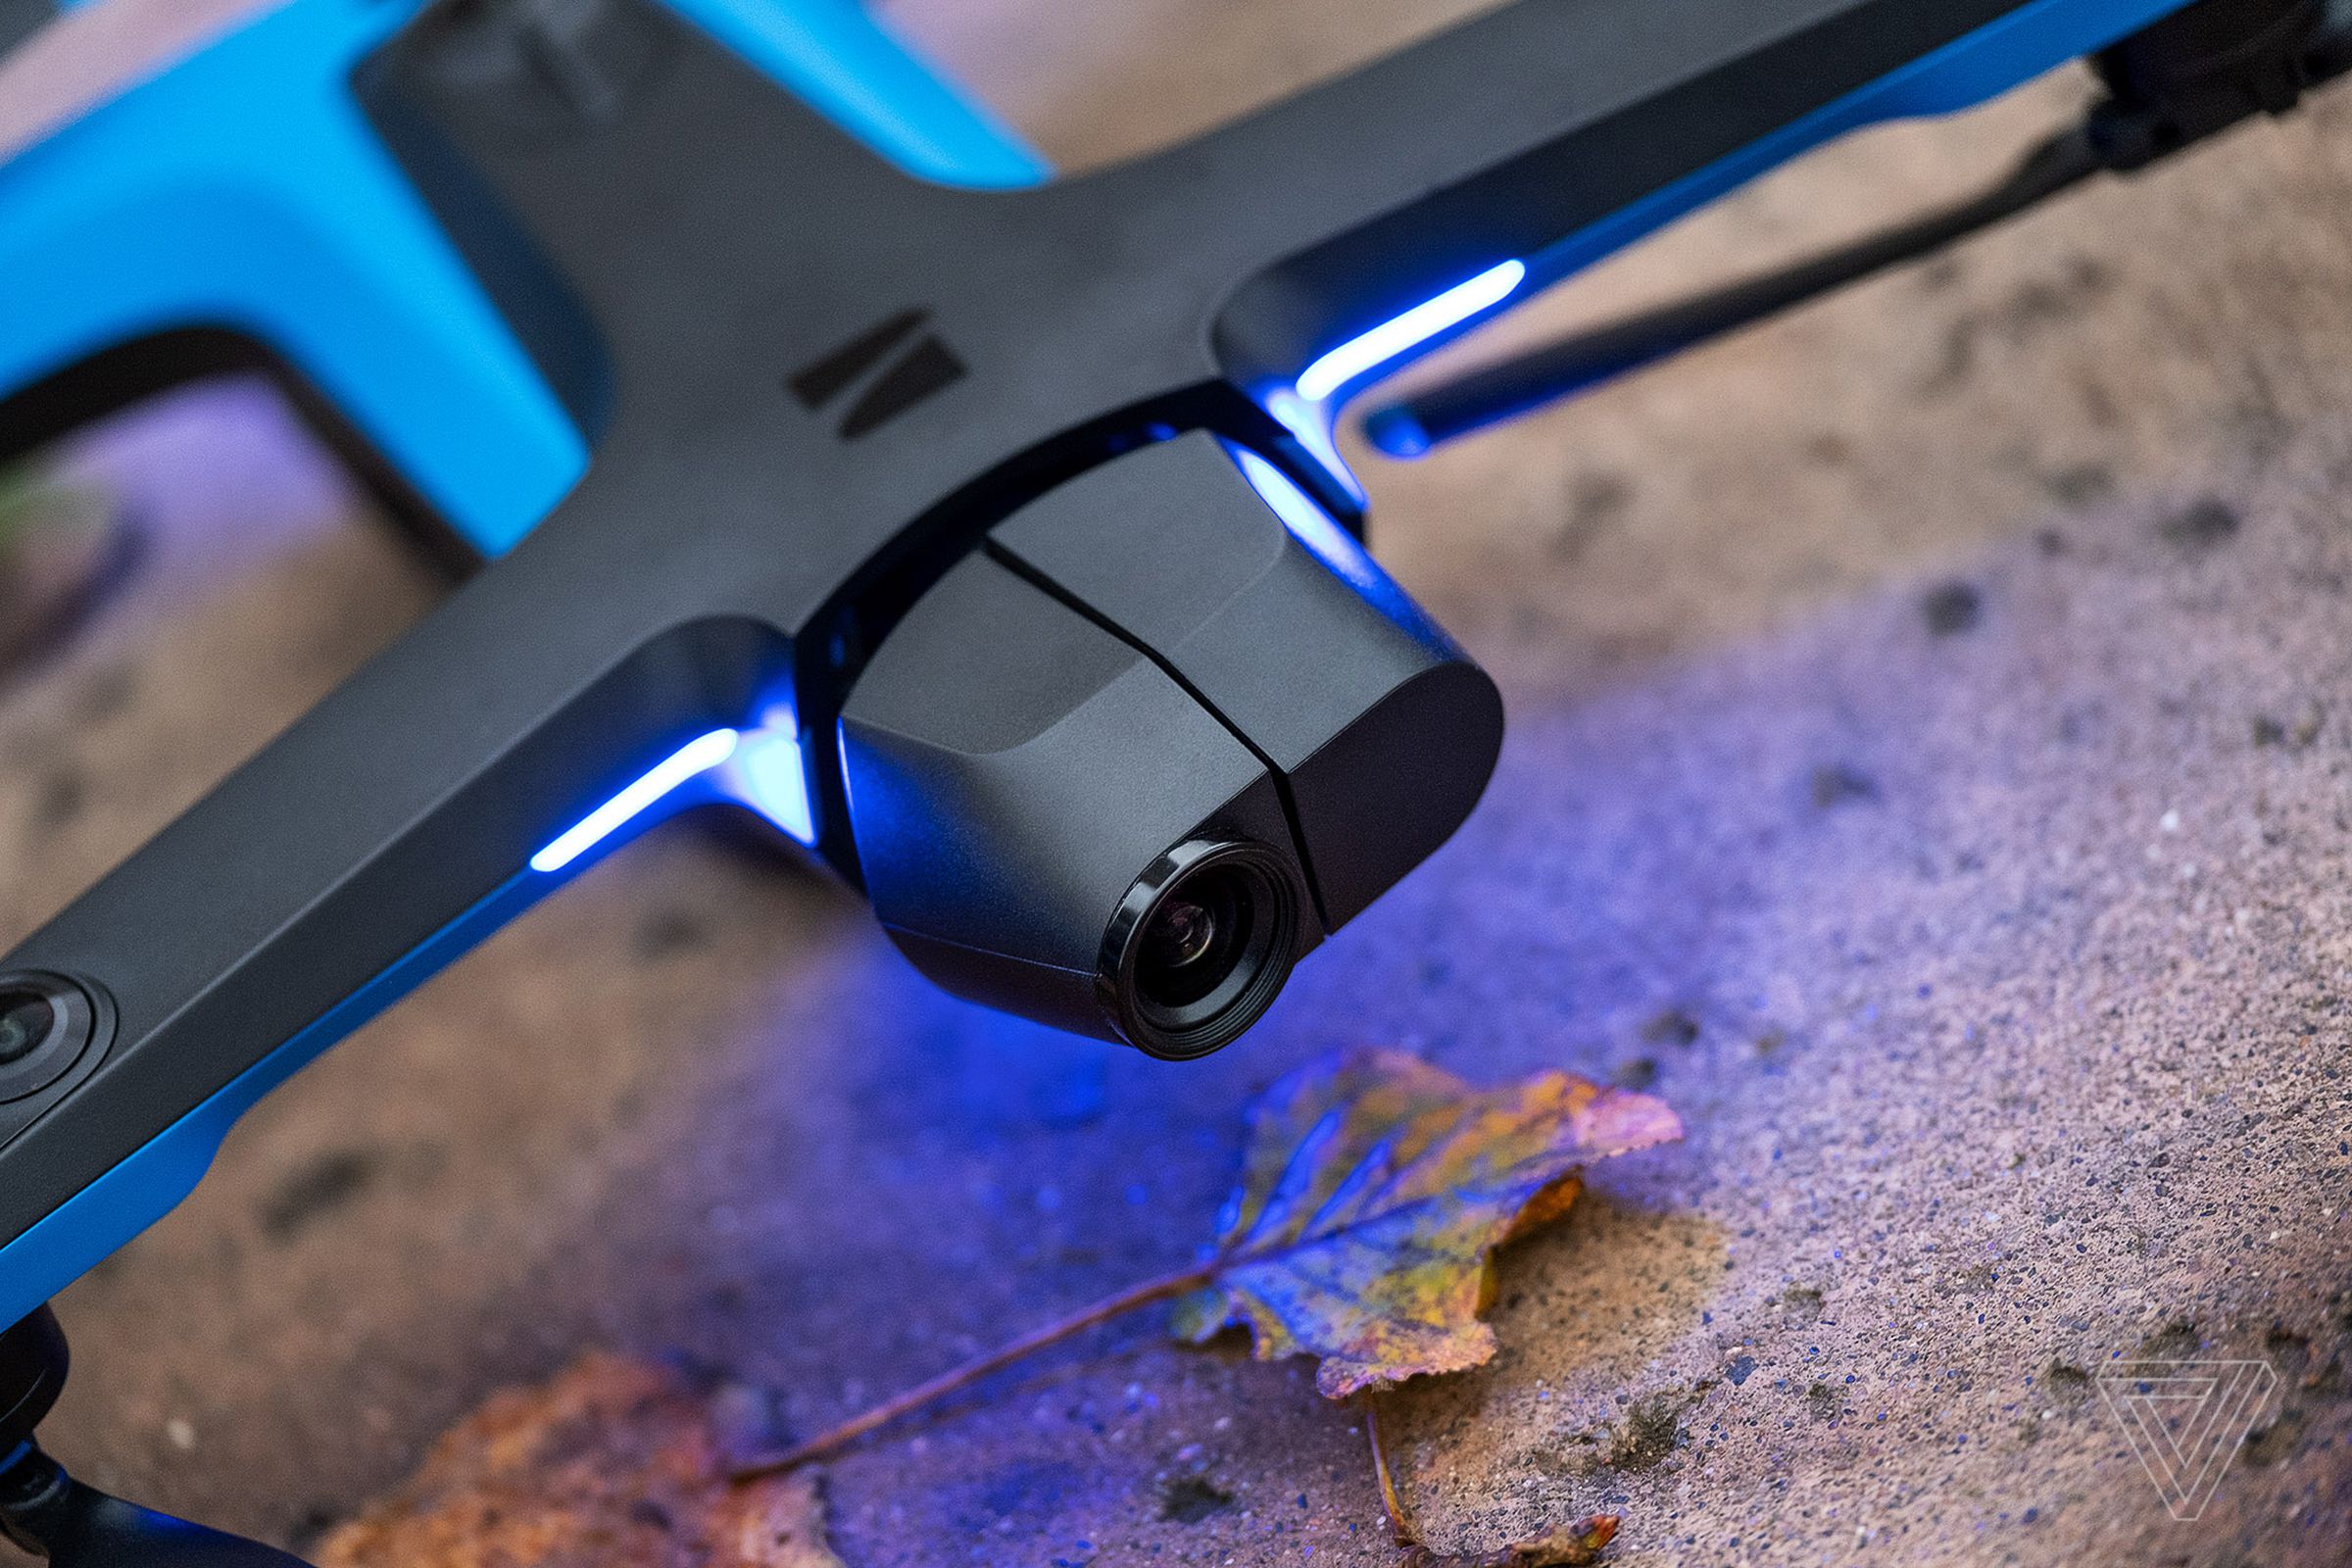 The Skydio 2’s secret sauce is an array of six navigation cameras on top and bottom, stitched together in real time by an Nvidia chip. Read more here.